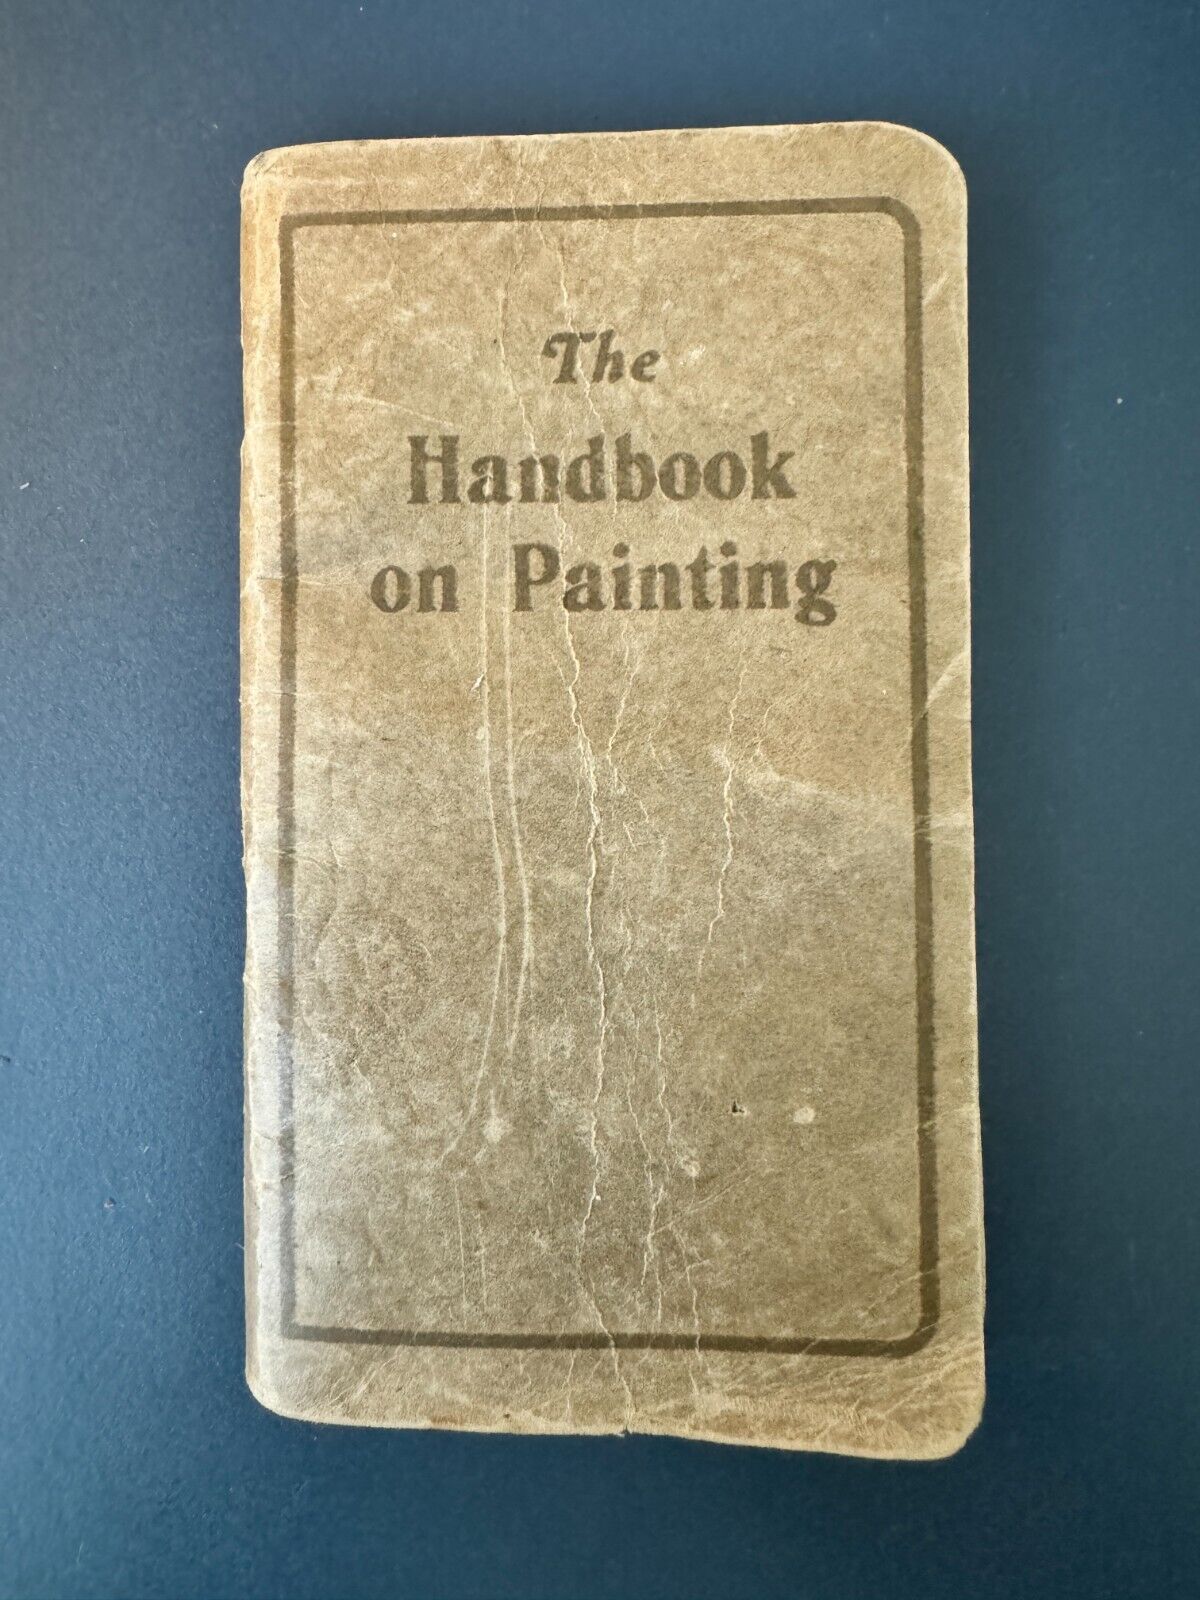 The Handbook Of Painting Copyright 1926 Booklet